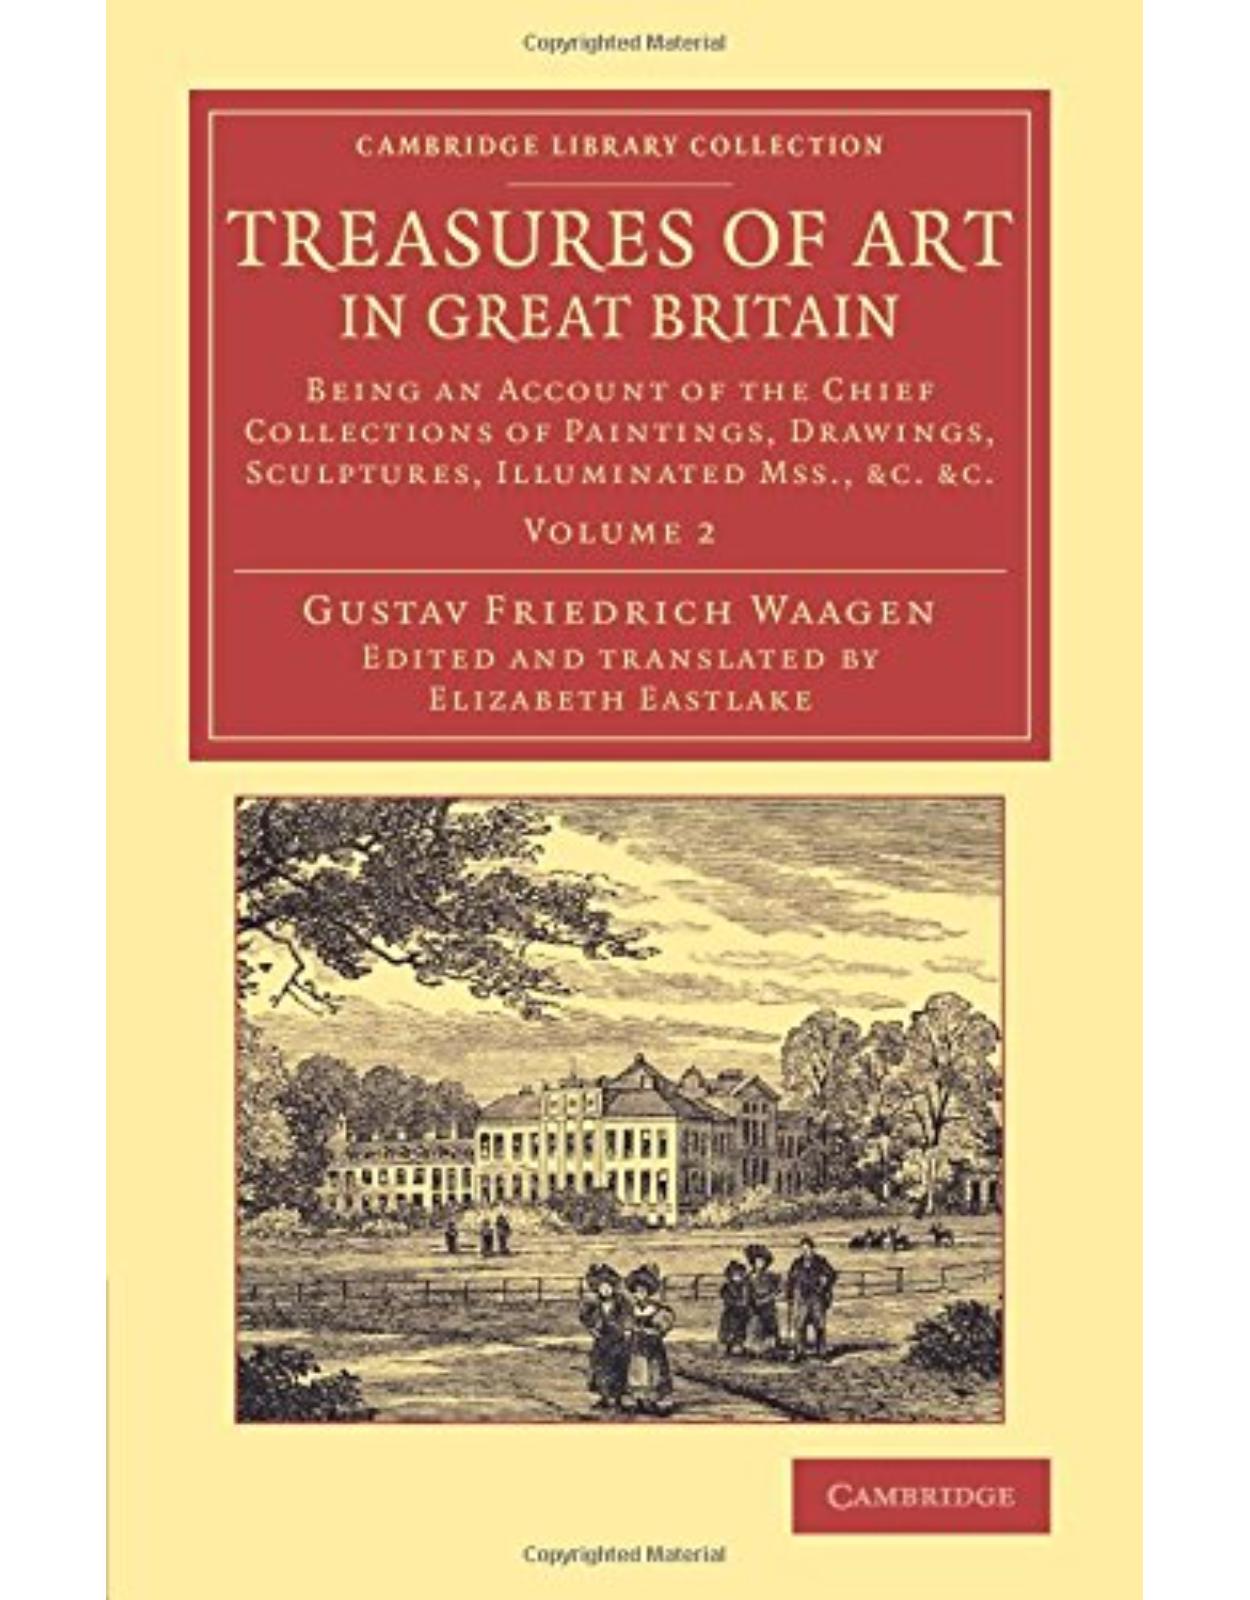 Treasures of Art in Great Britain: Being an Account of the Chief Collections of Paintings, Drawings, Sculptures, Illuminated Mss. (Volume 2)